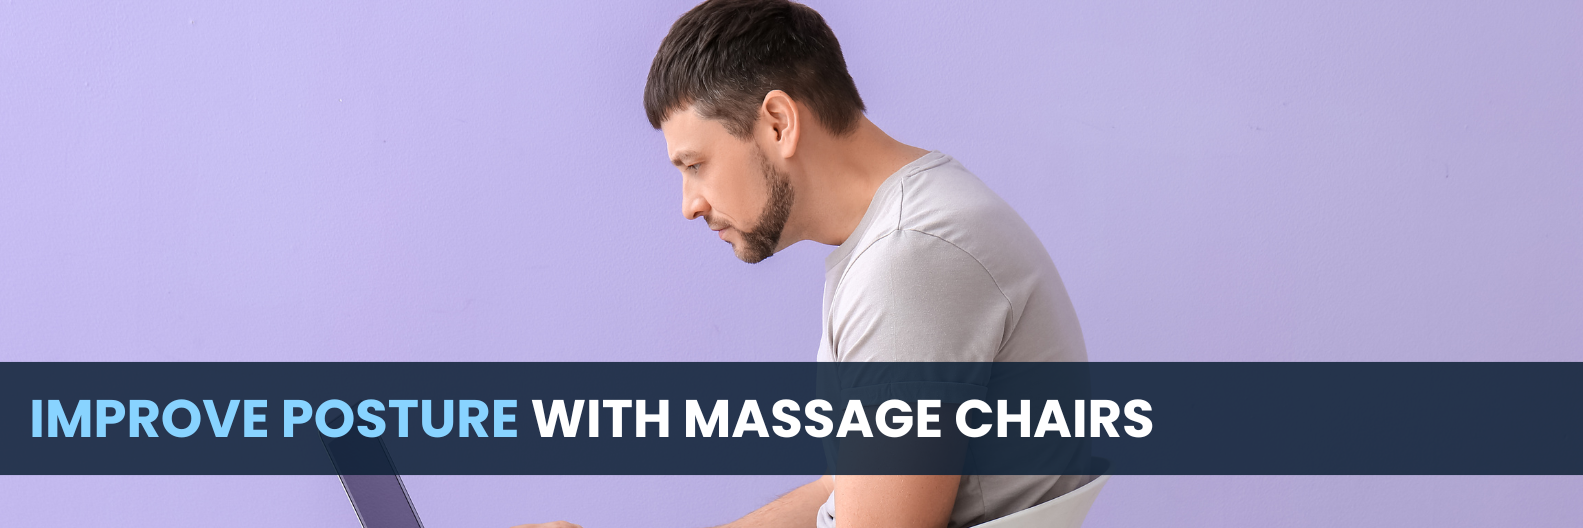 Enhance posture with massage chairs. Explore the key benefits and learn how massage chairs can assist you in achieving improved posture.